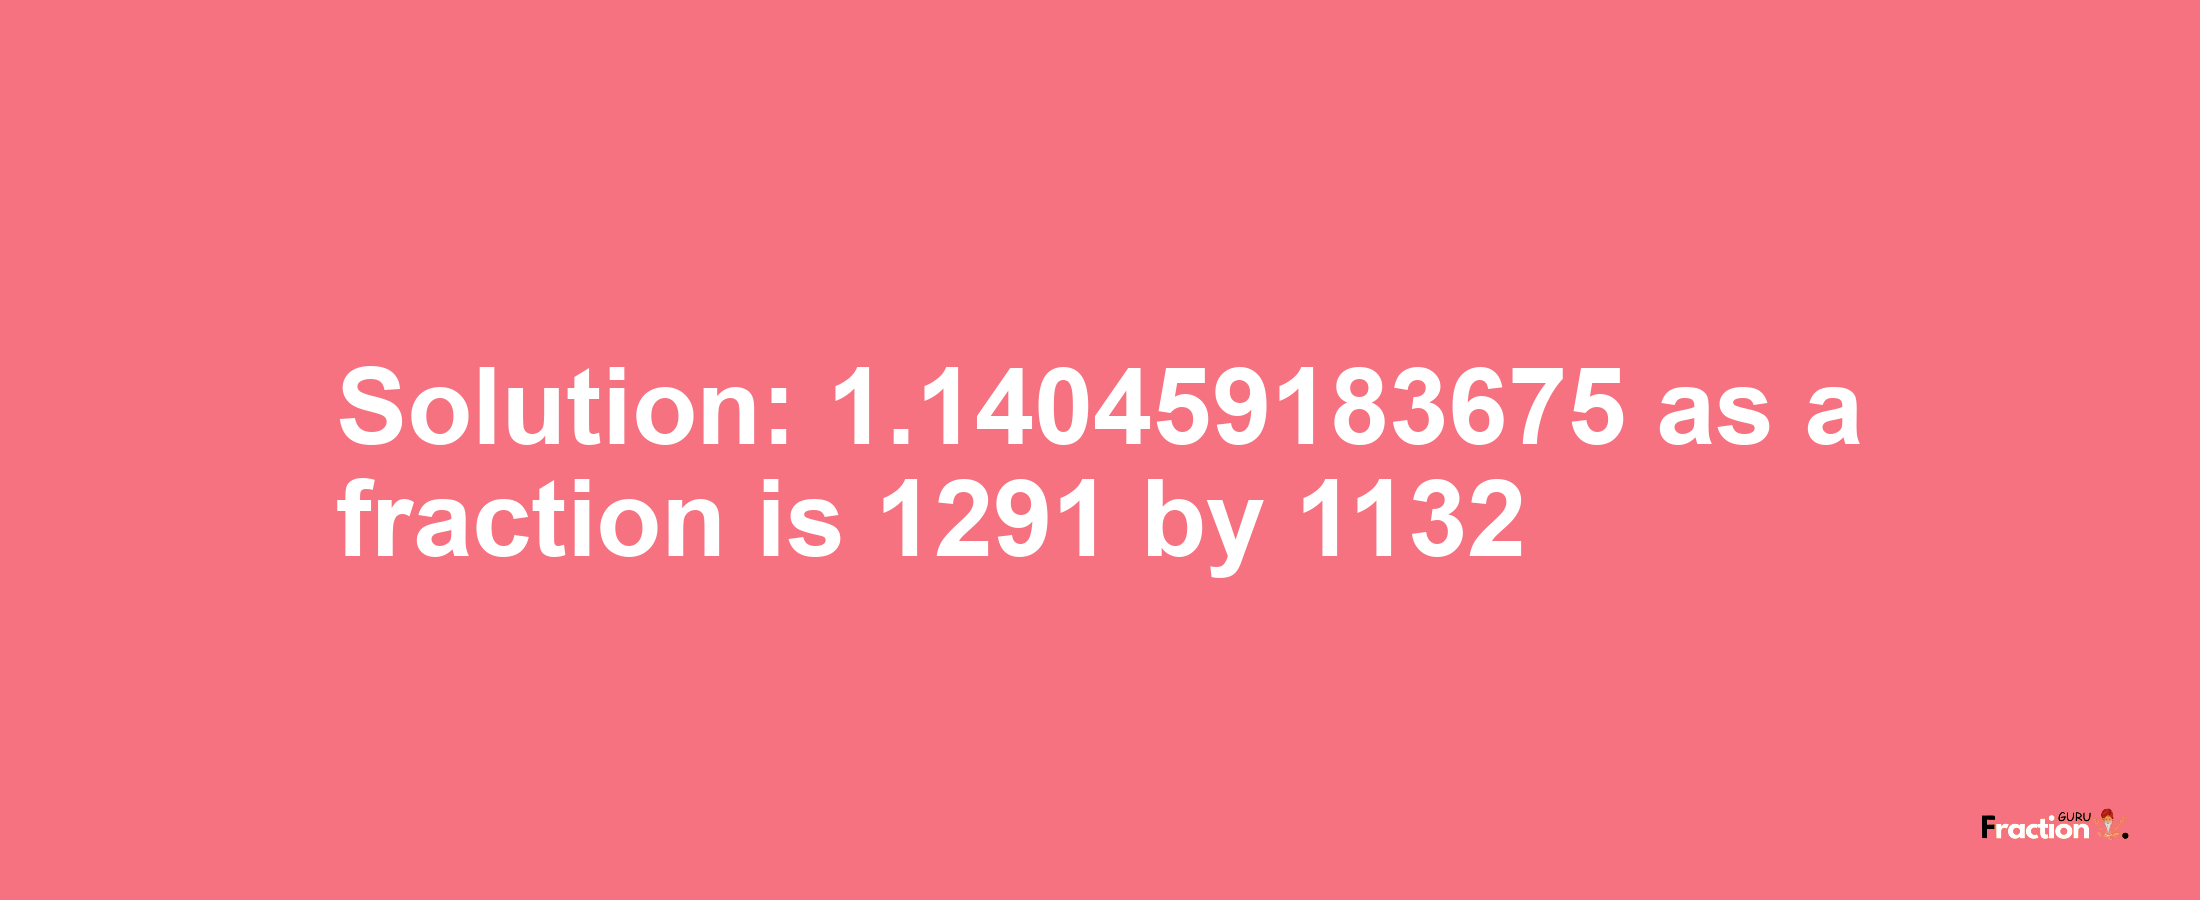 Solution:1.140459183675 as a fraction is 1291/1132